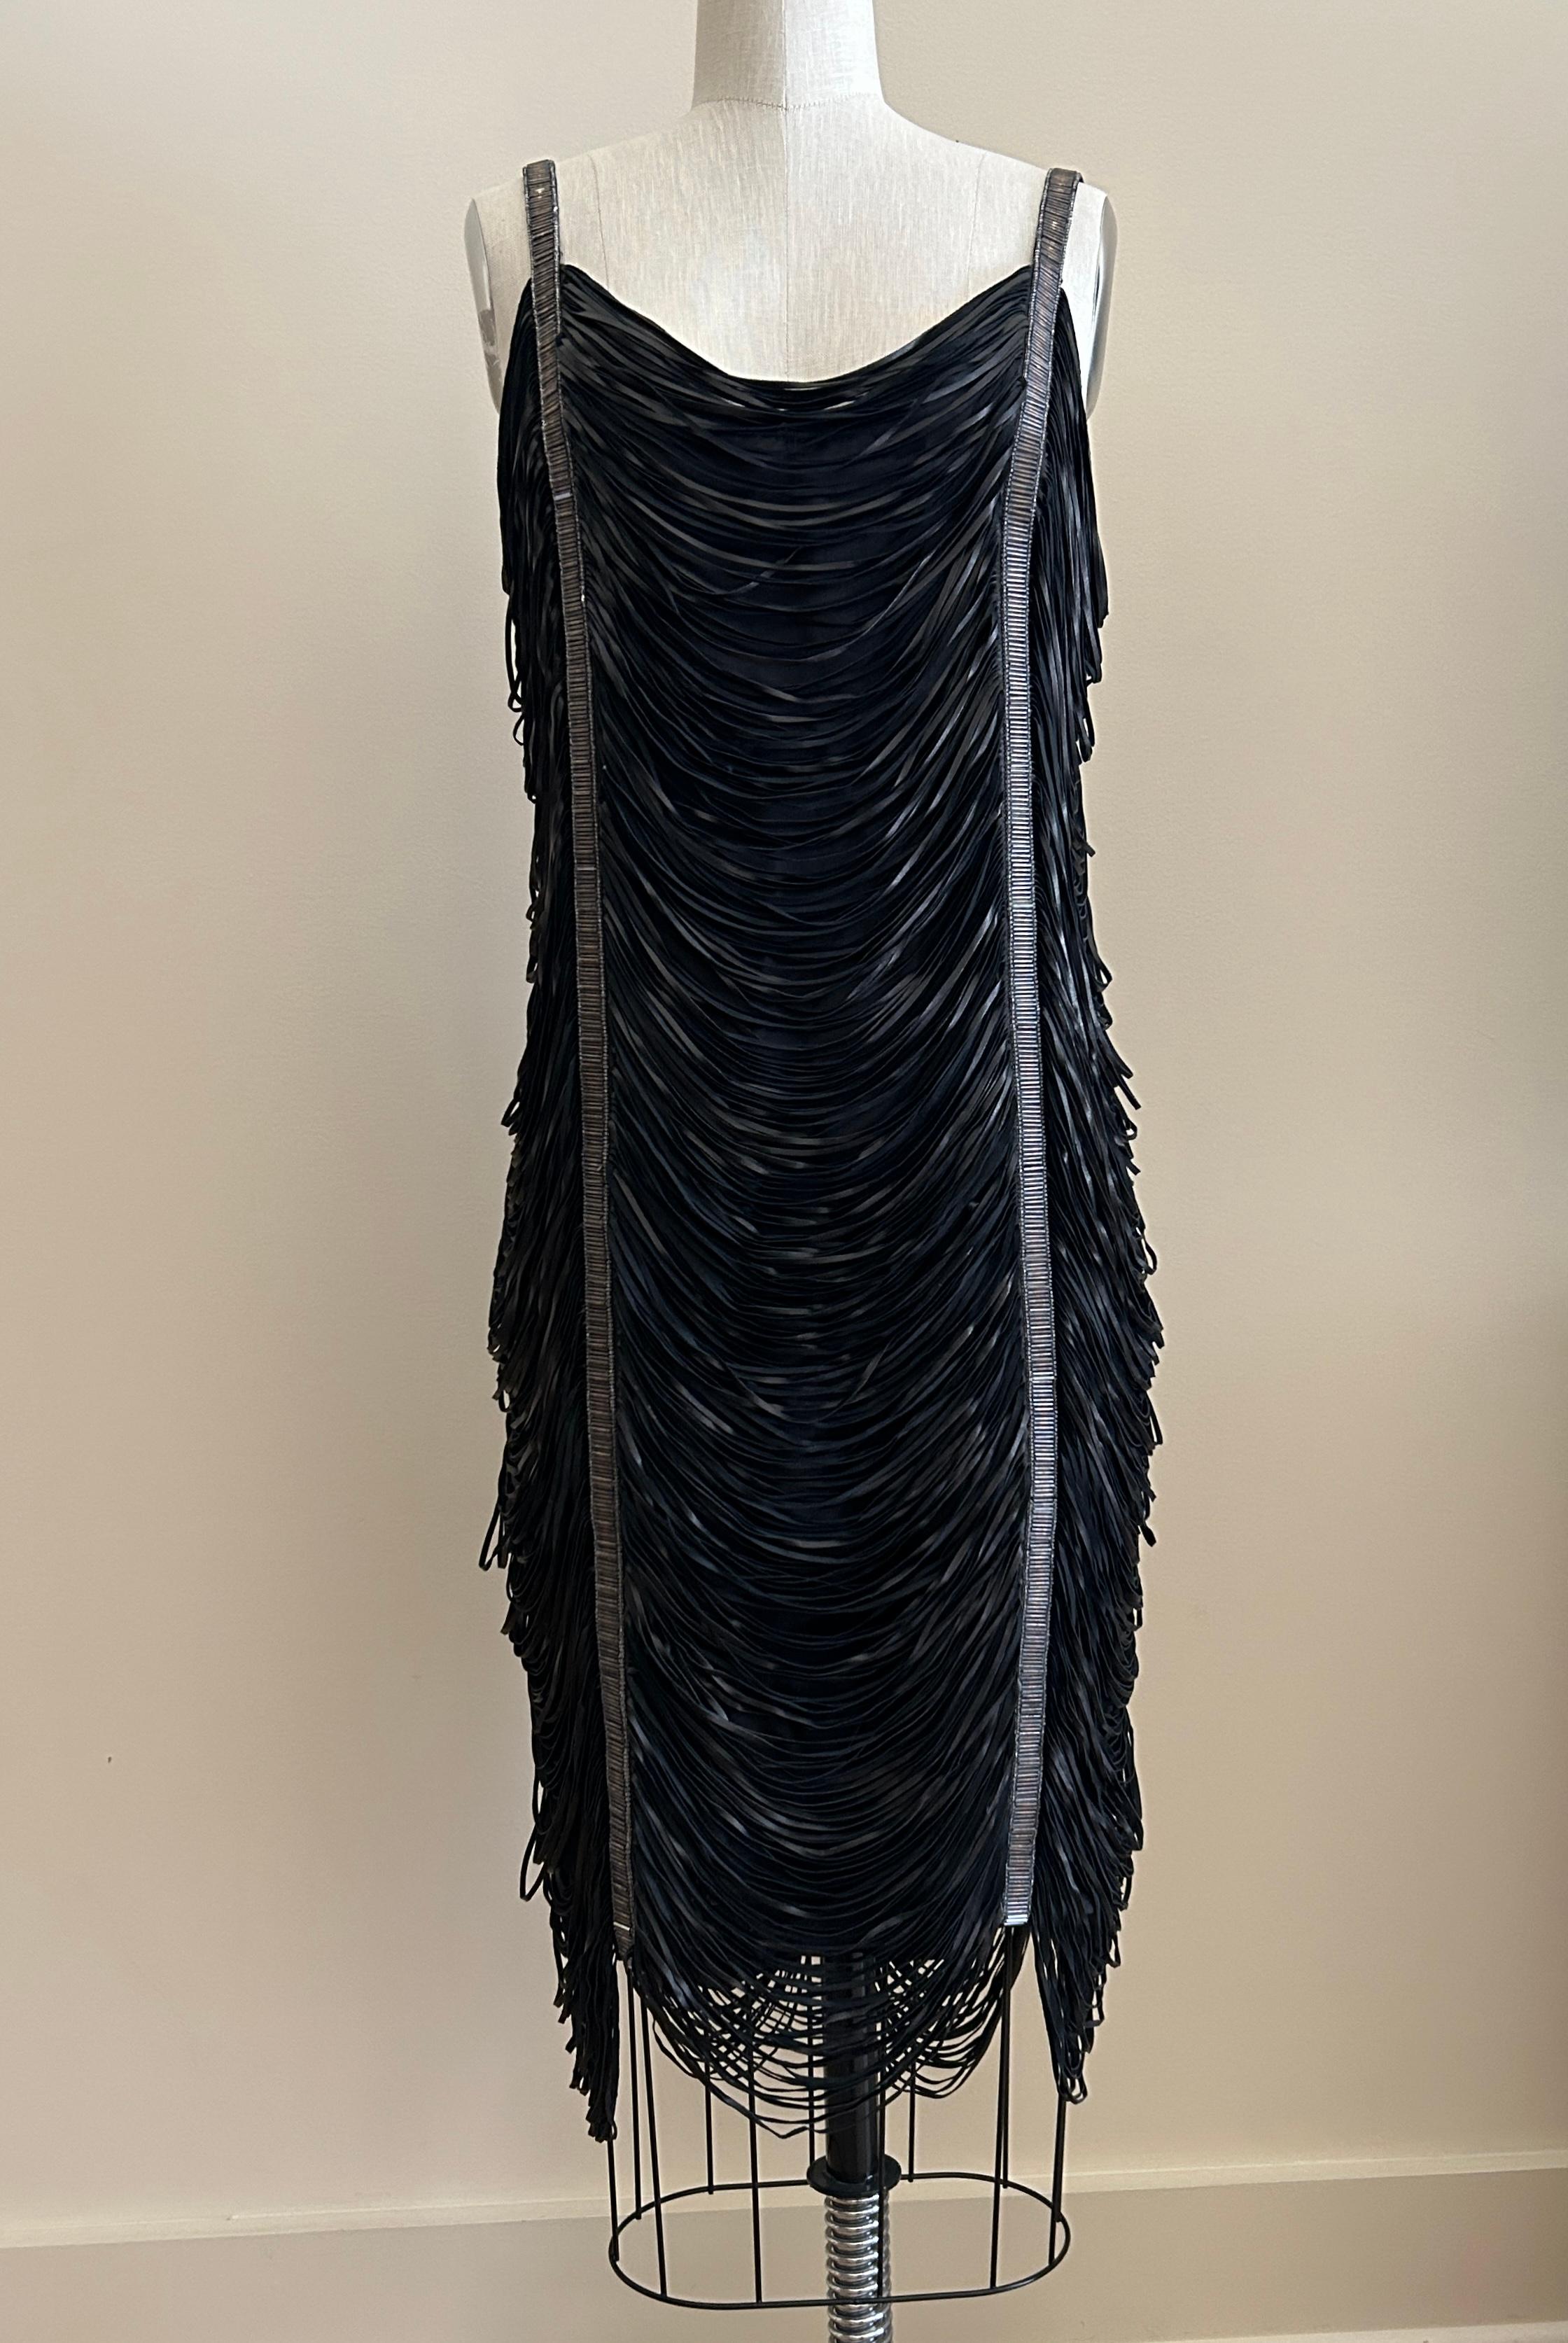 Rare Alexander McQueen vintage 2000s black leather fringe dress with beaded straps that travel the full length of the dress. Deep v back. Back zip.

Genuine leather, fully lined in 100% silk.

Made in Italy. 

Labelled size IT 42, approximate US 6.